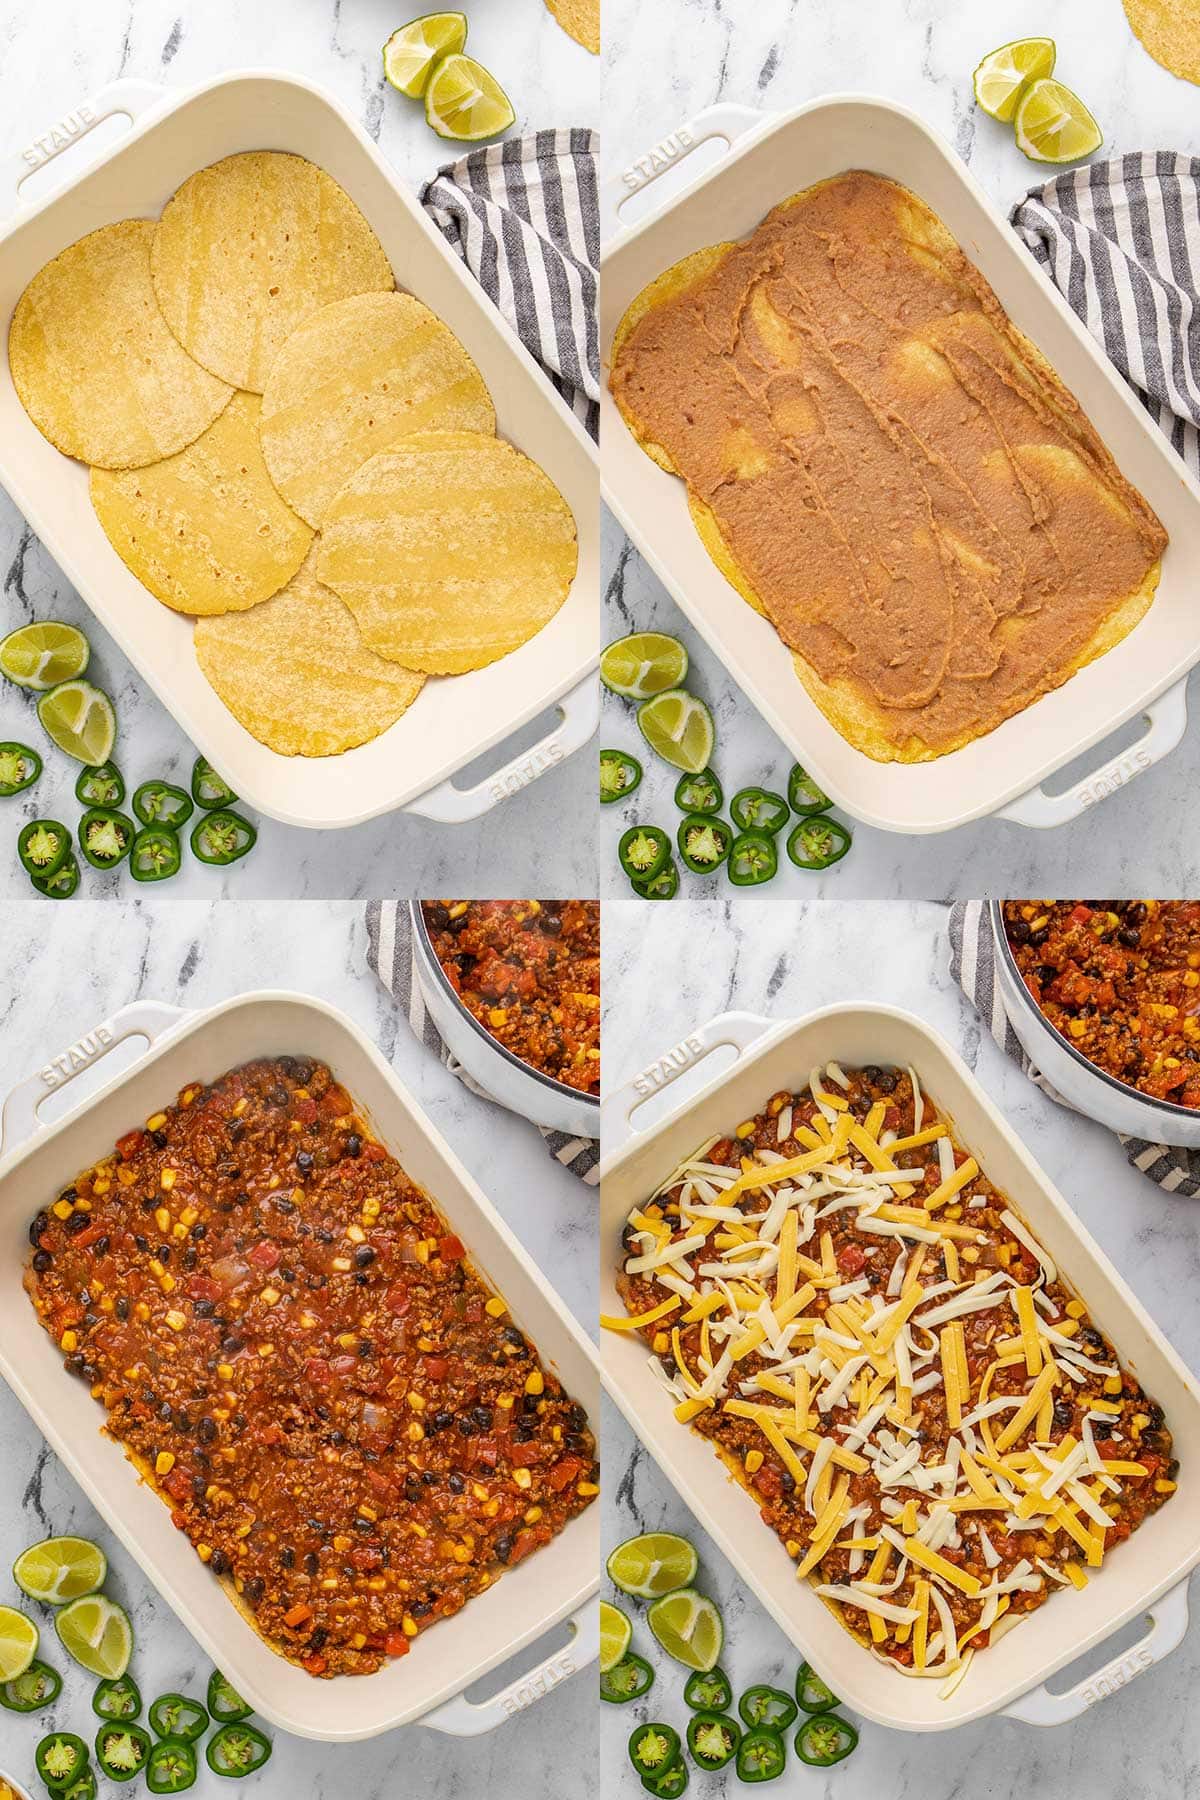 Four step by step photos on how to layer Mexican ground beef casserole in a 9x13 casserole dish.